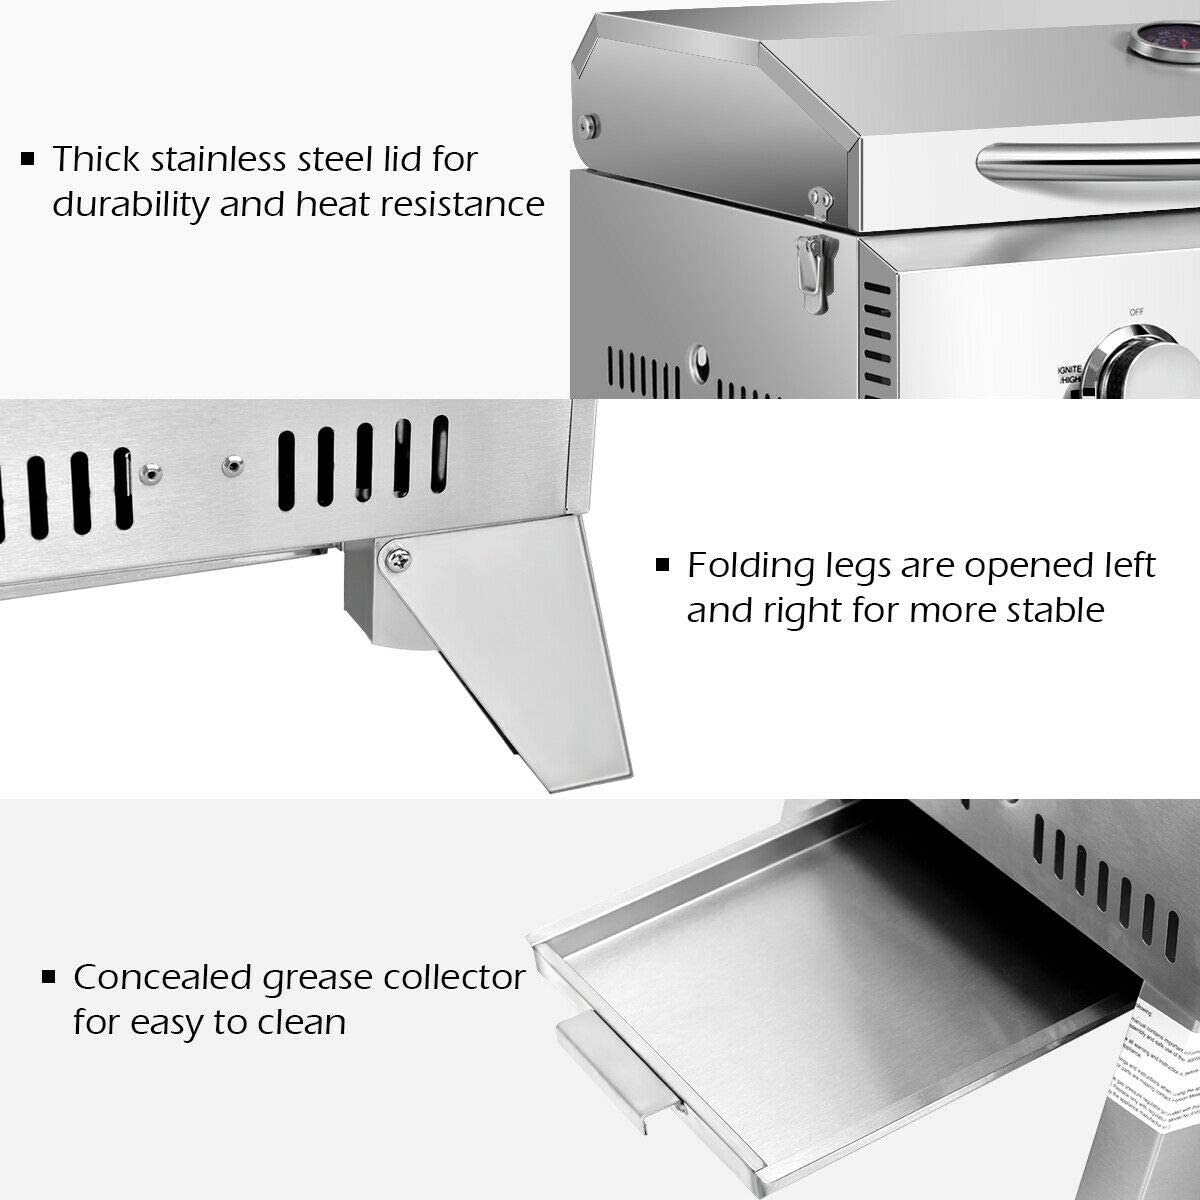 Extra Large Outdoor Portable Gas Grill, Tabletop Stainless Steel Propane Griddle with 2 Burner & Foldable Legs, Patio Garden BBQ Grid, 20000 BTU